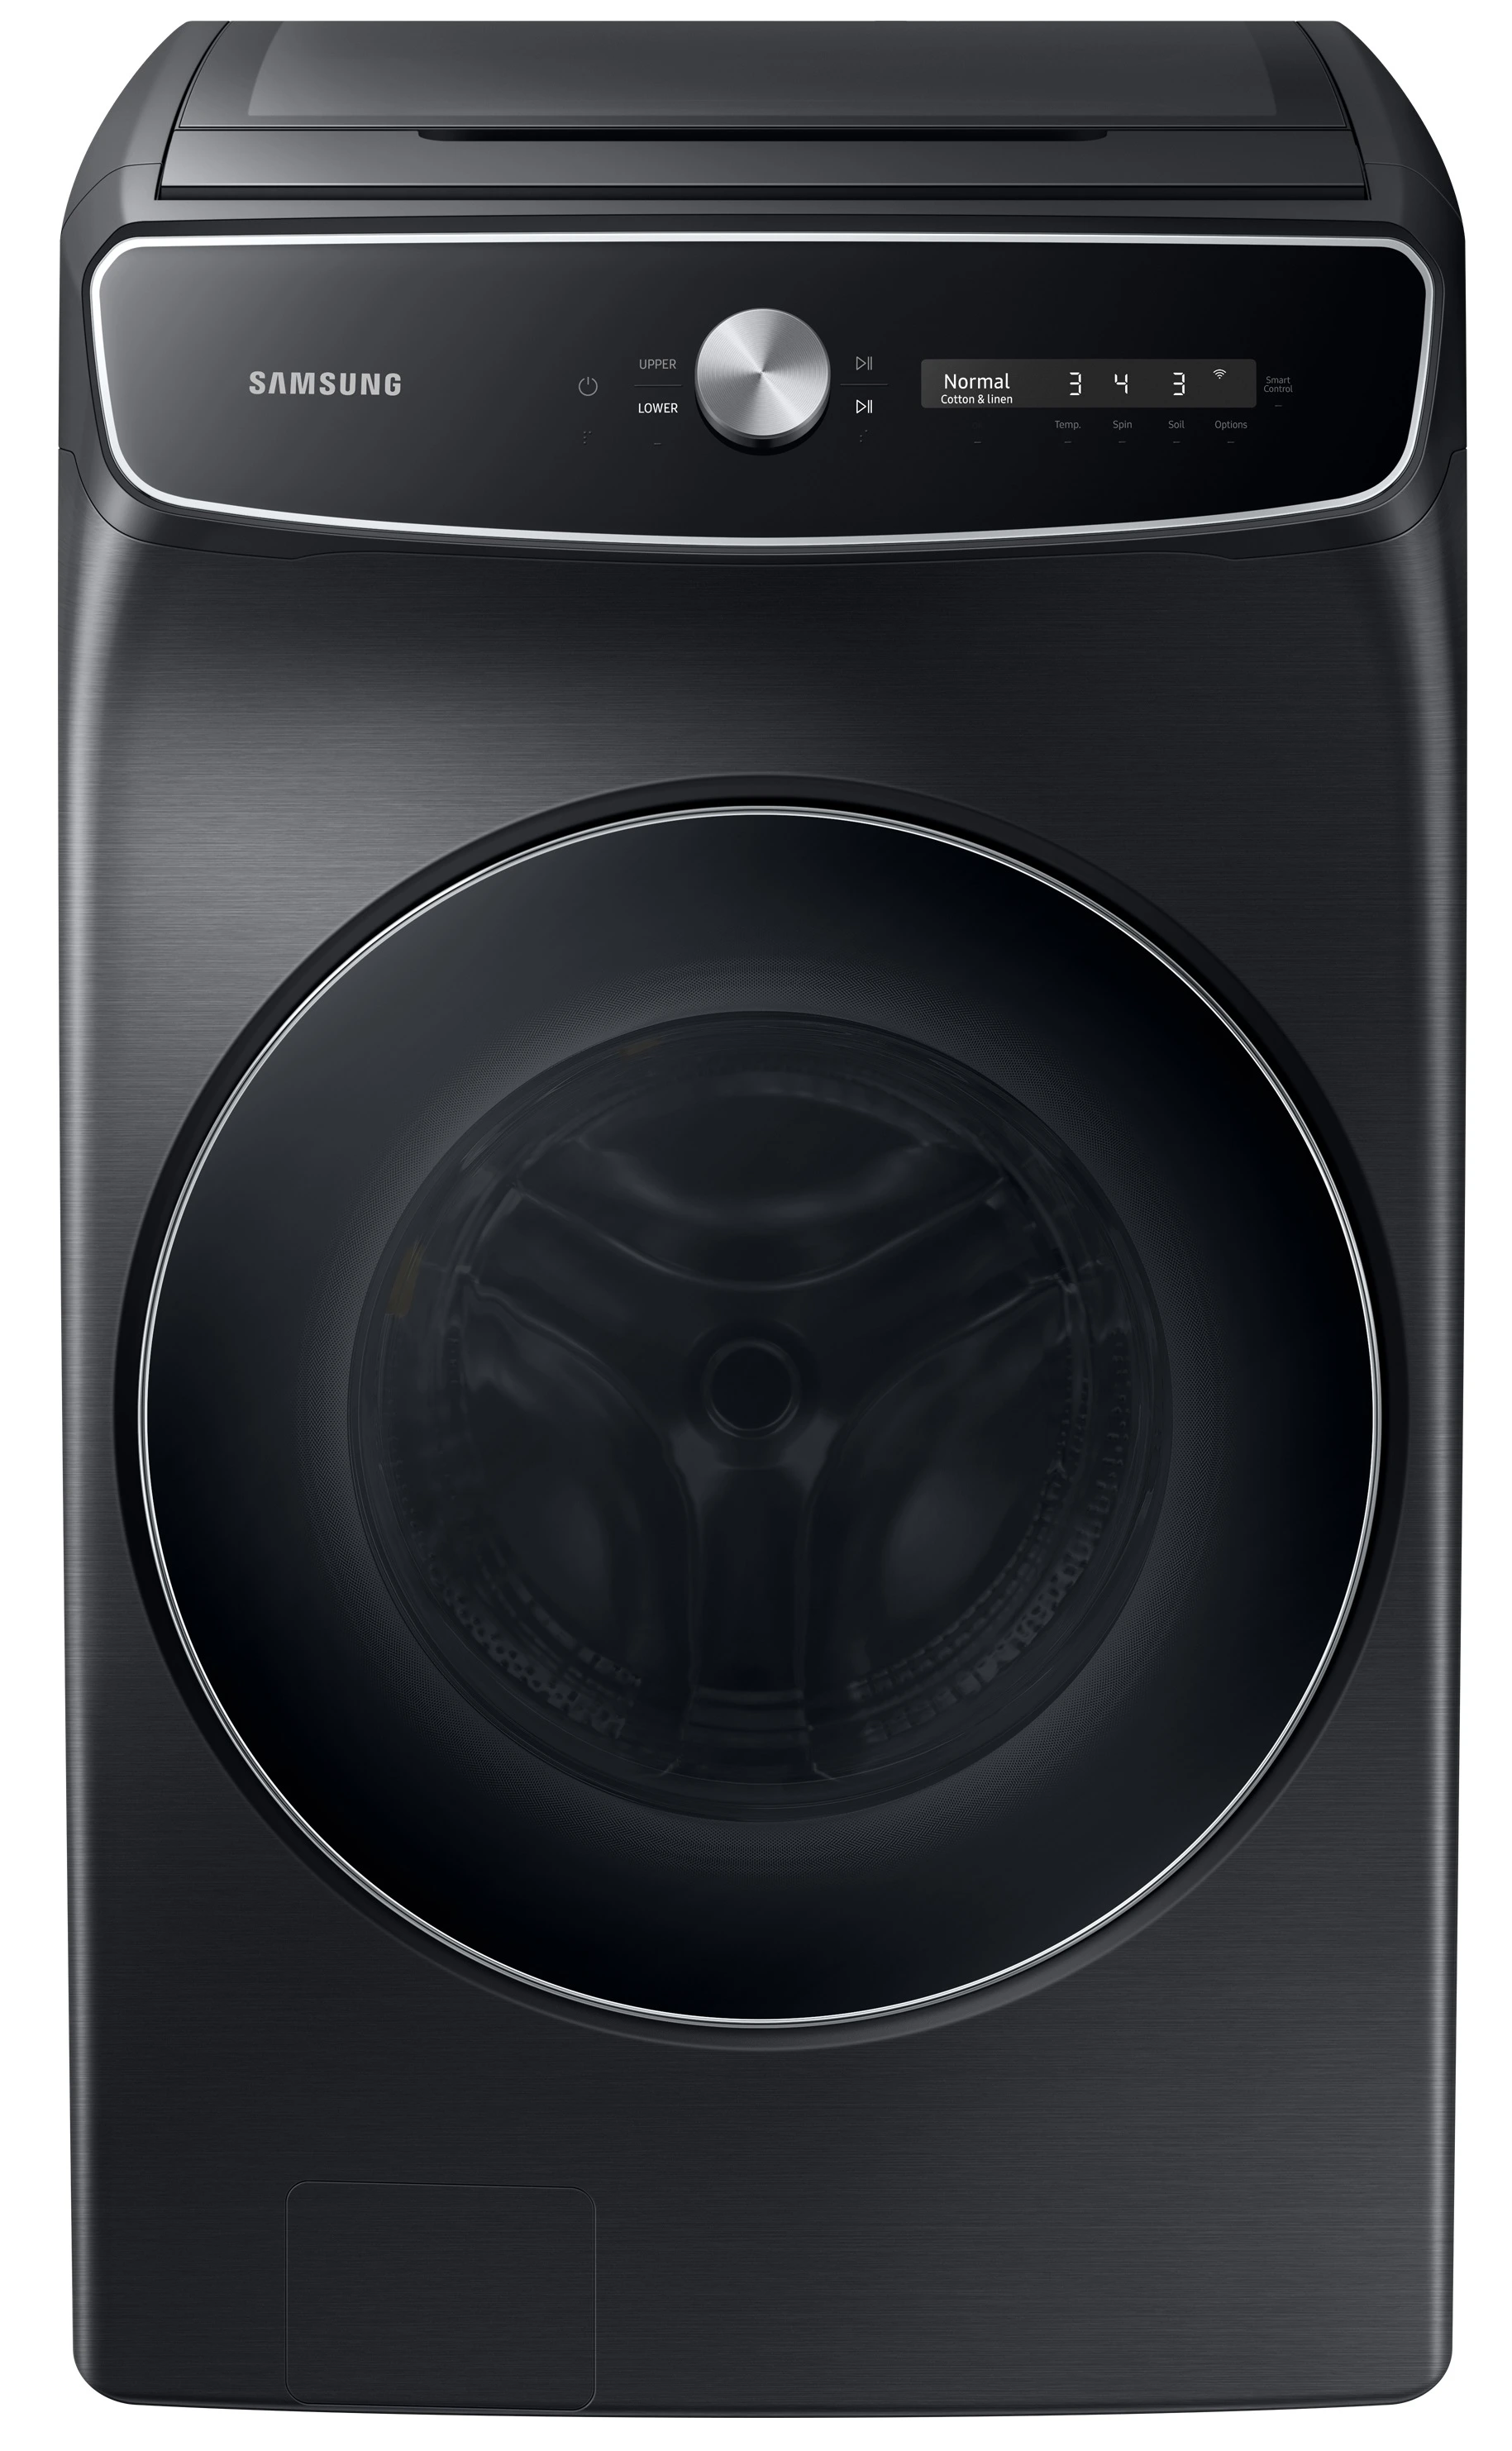 Front view of the Samsung WV60A9900AV front load washer 